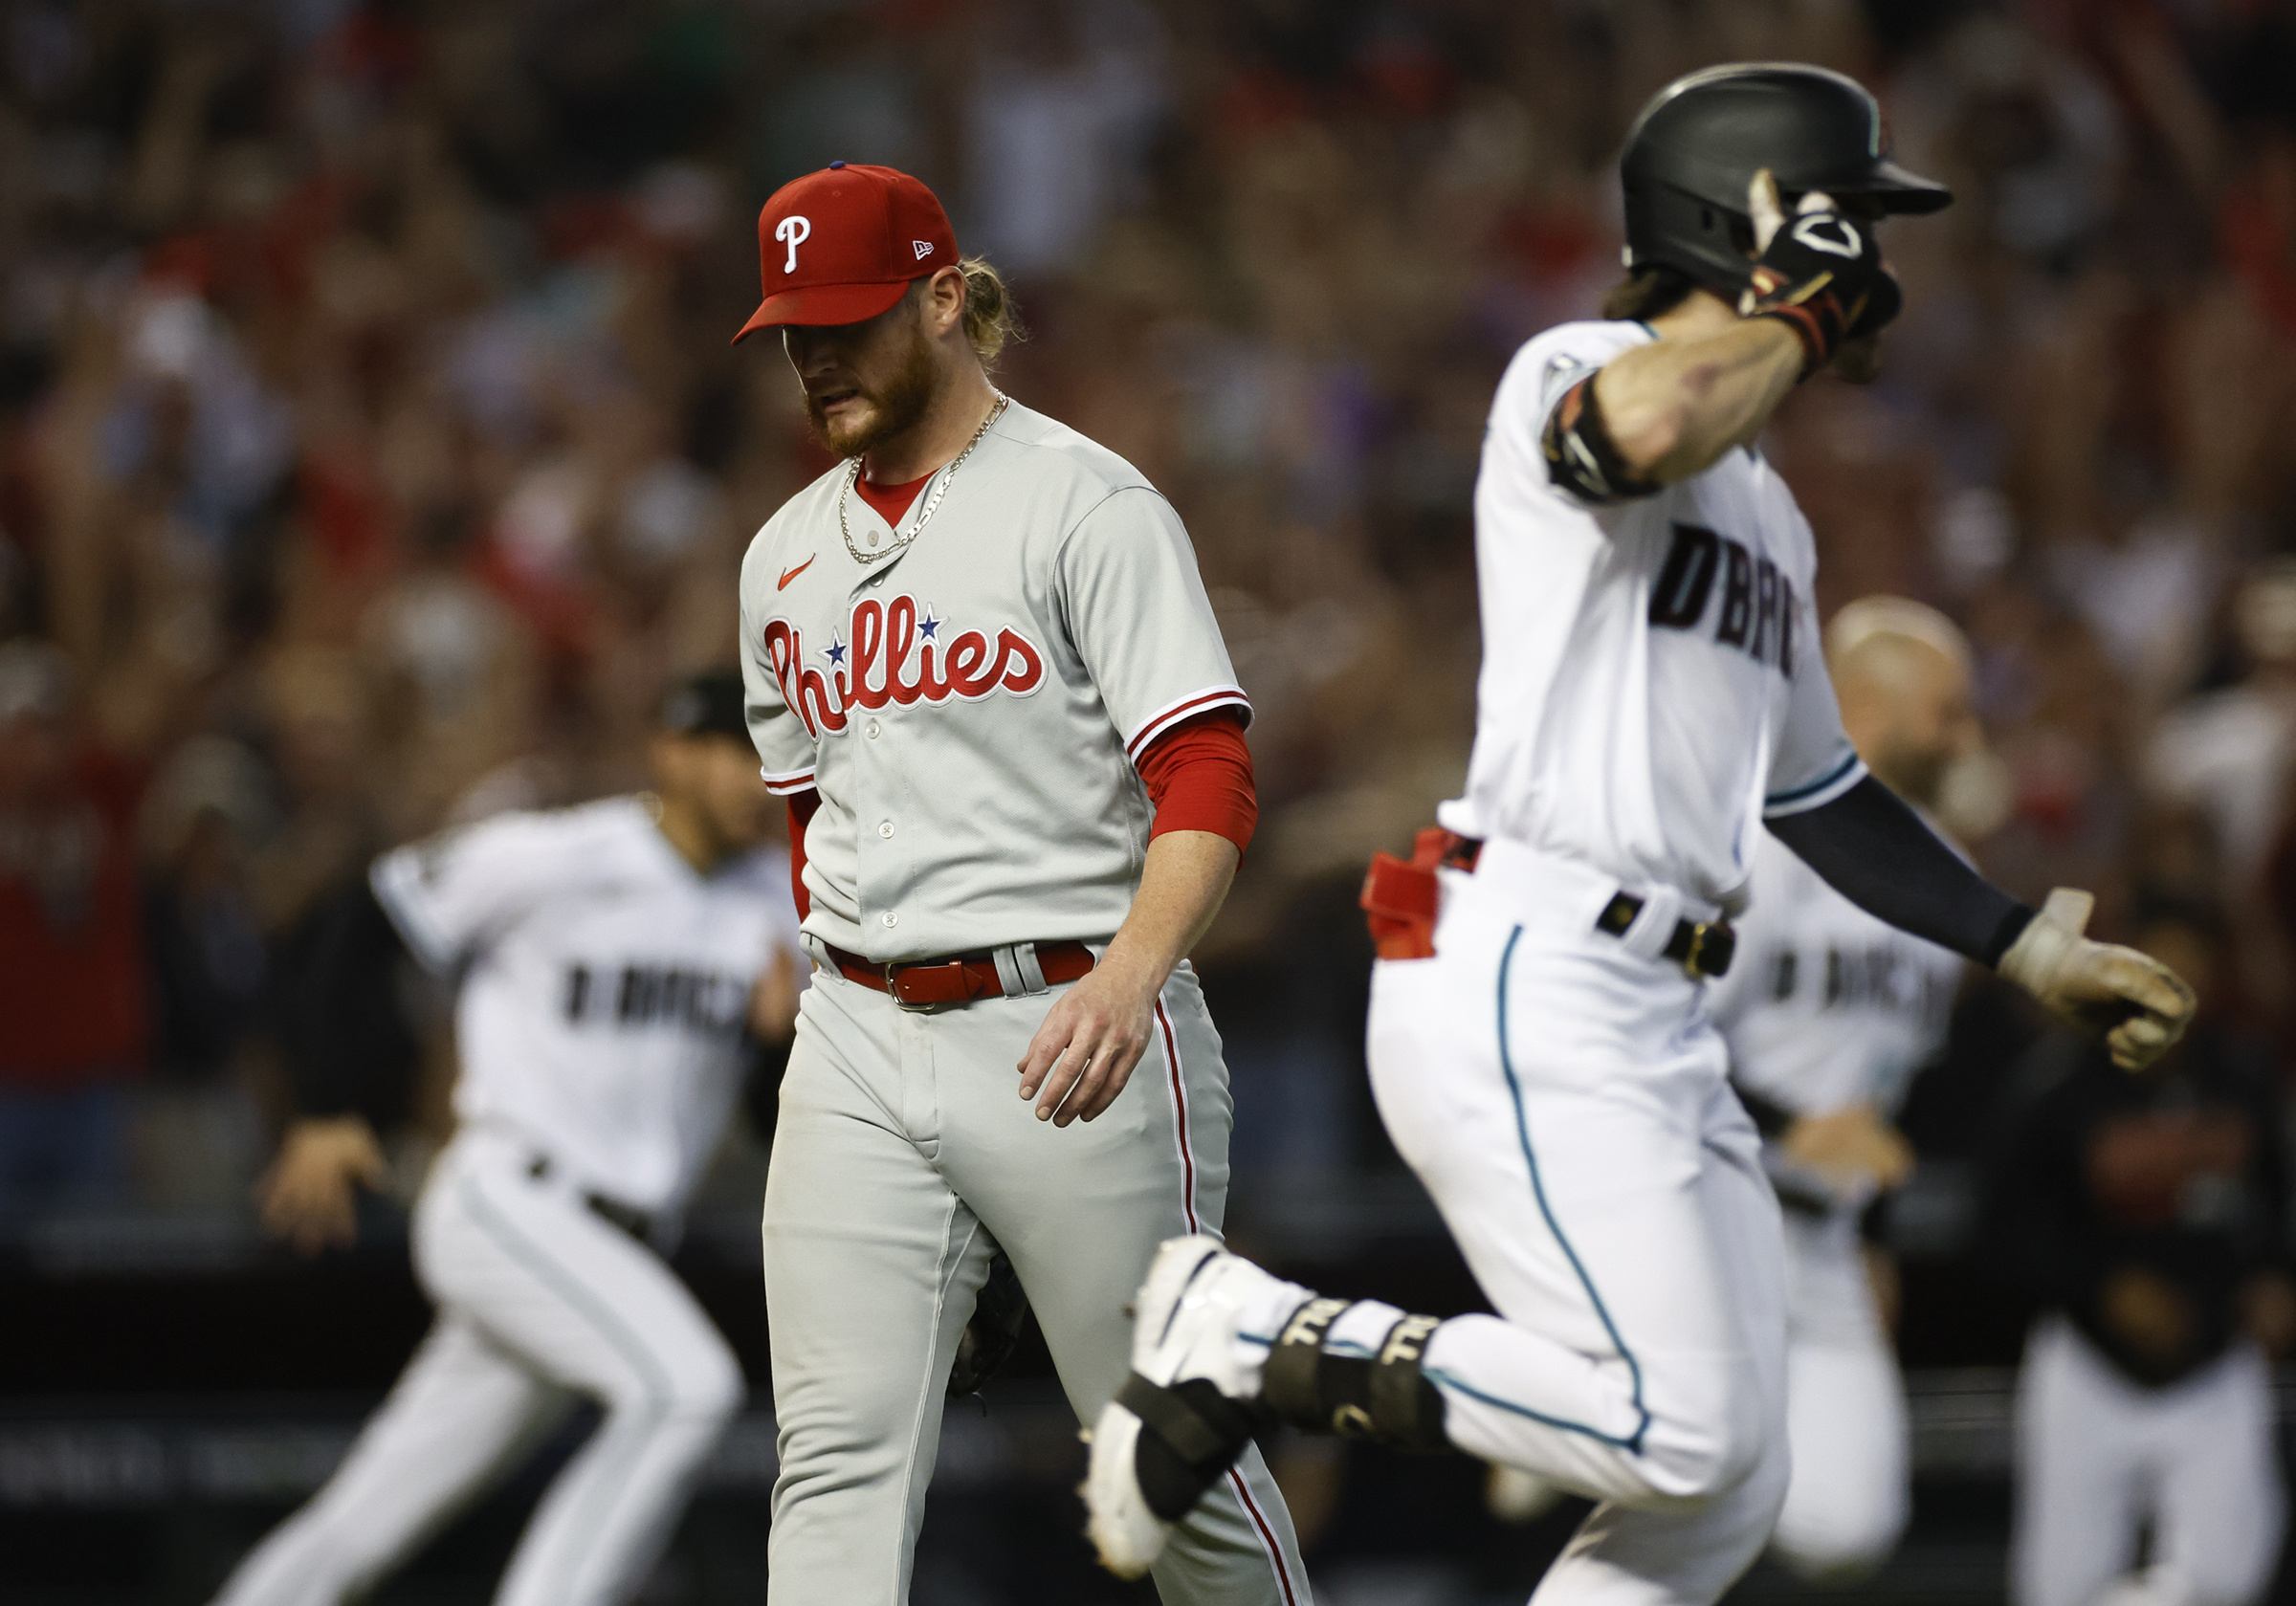 Phillies Miss Opportunity, Look to Regain Control at Home in Game